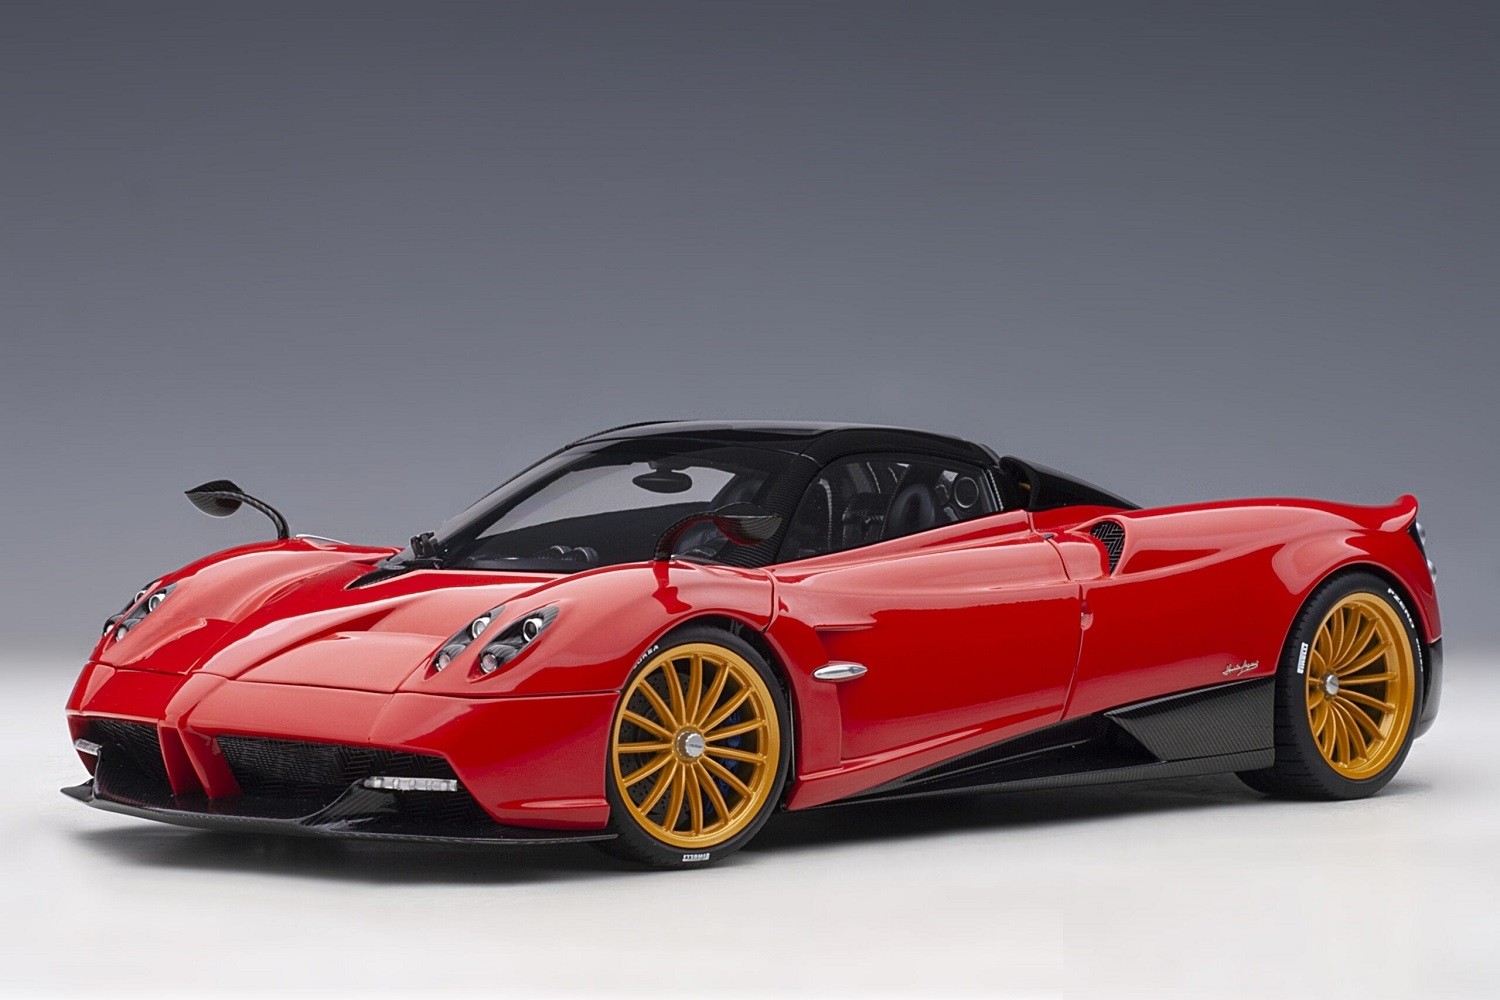 Red Pagani Huayra Roadster Rosso Monza 78287 AUTOart scale 1:18